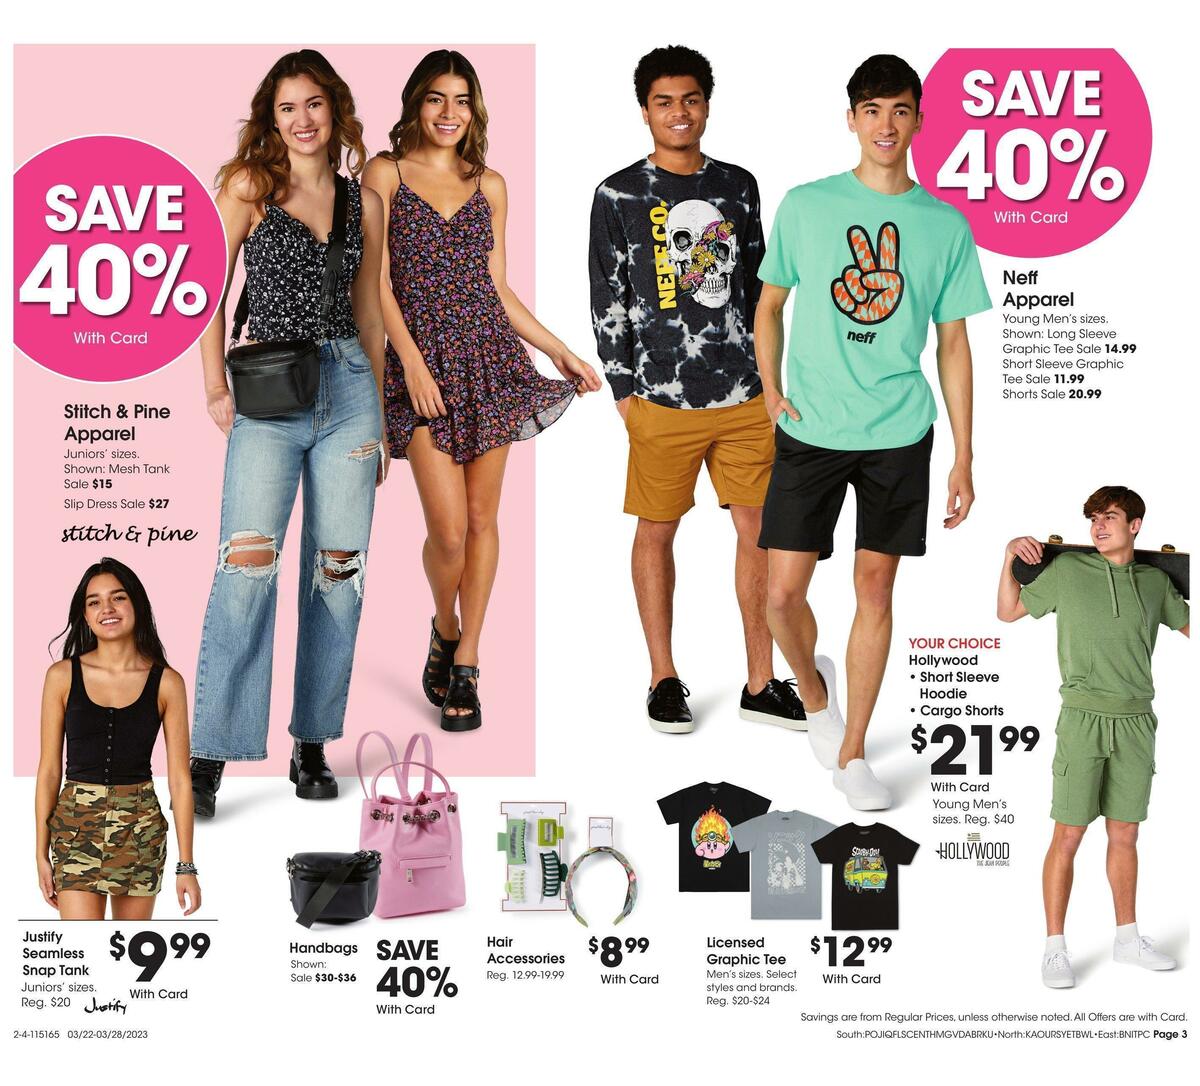 Fred Meyer General Merchandise Weekly Ad from March 22